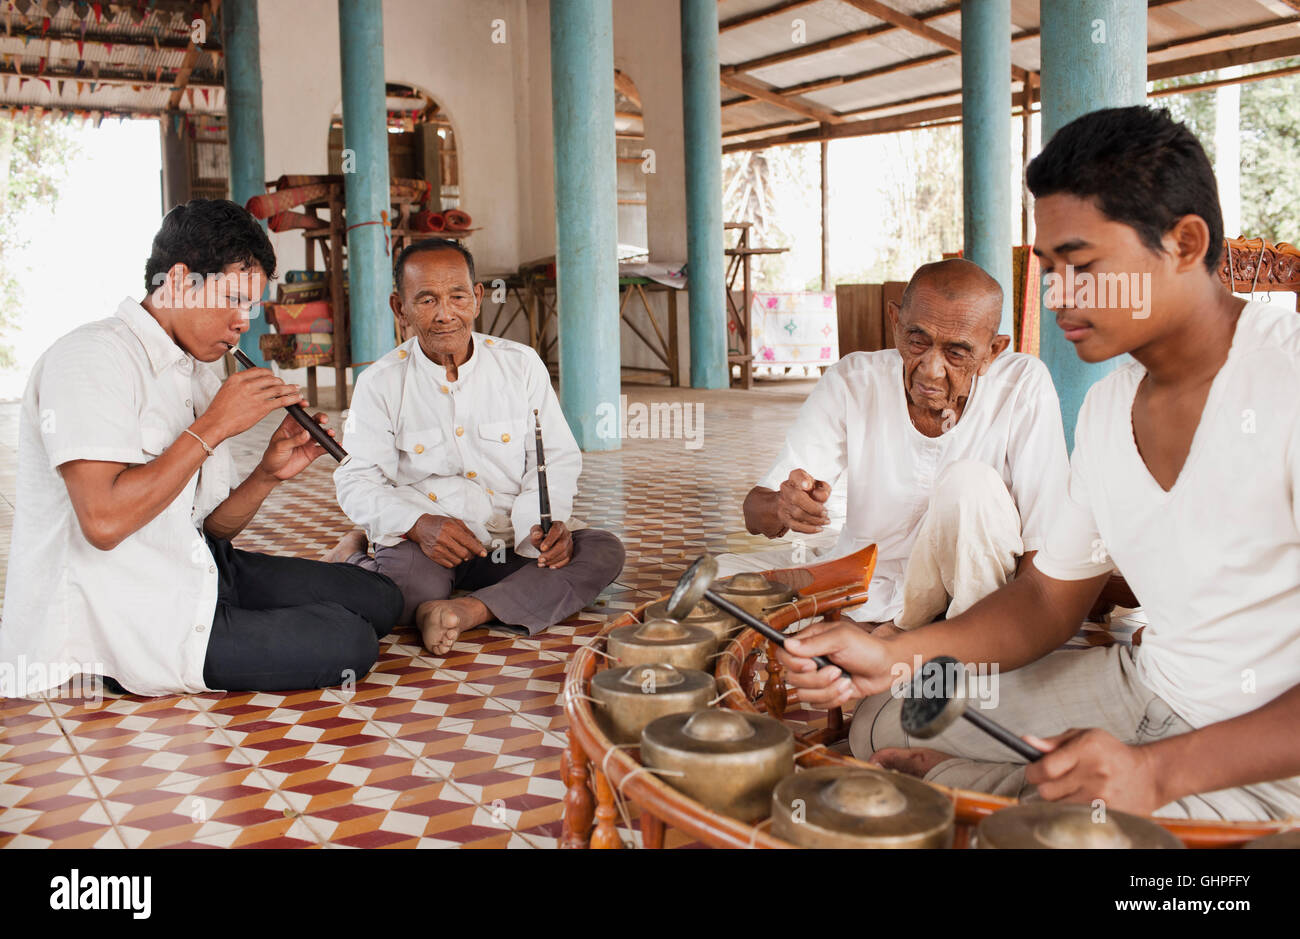 Master Ling Srei ( Srey) and his assistant  Um Chhoeum. teach a  Kantoam Ming  class at Wat Atwea, Siem Reap, Cambodia. Stock Photo